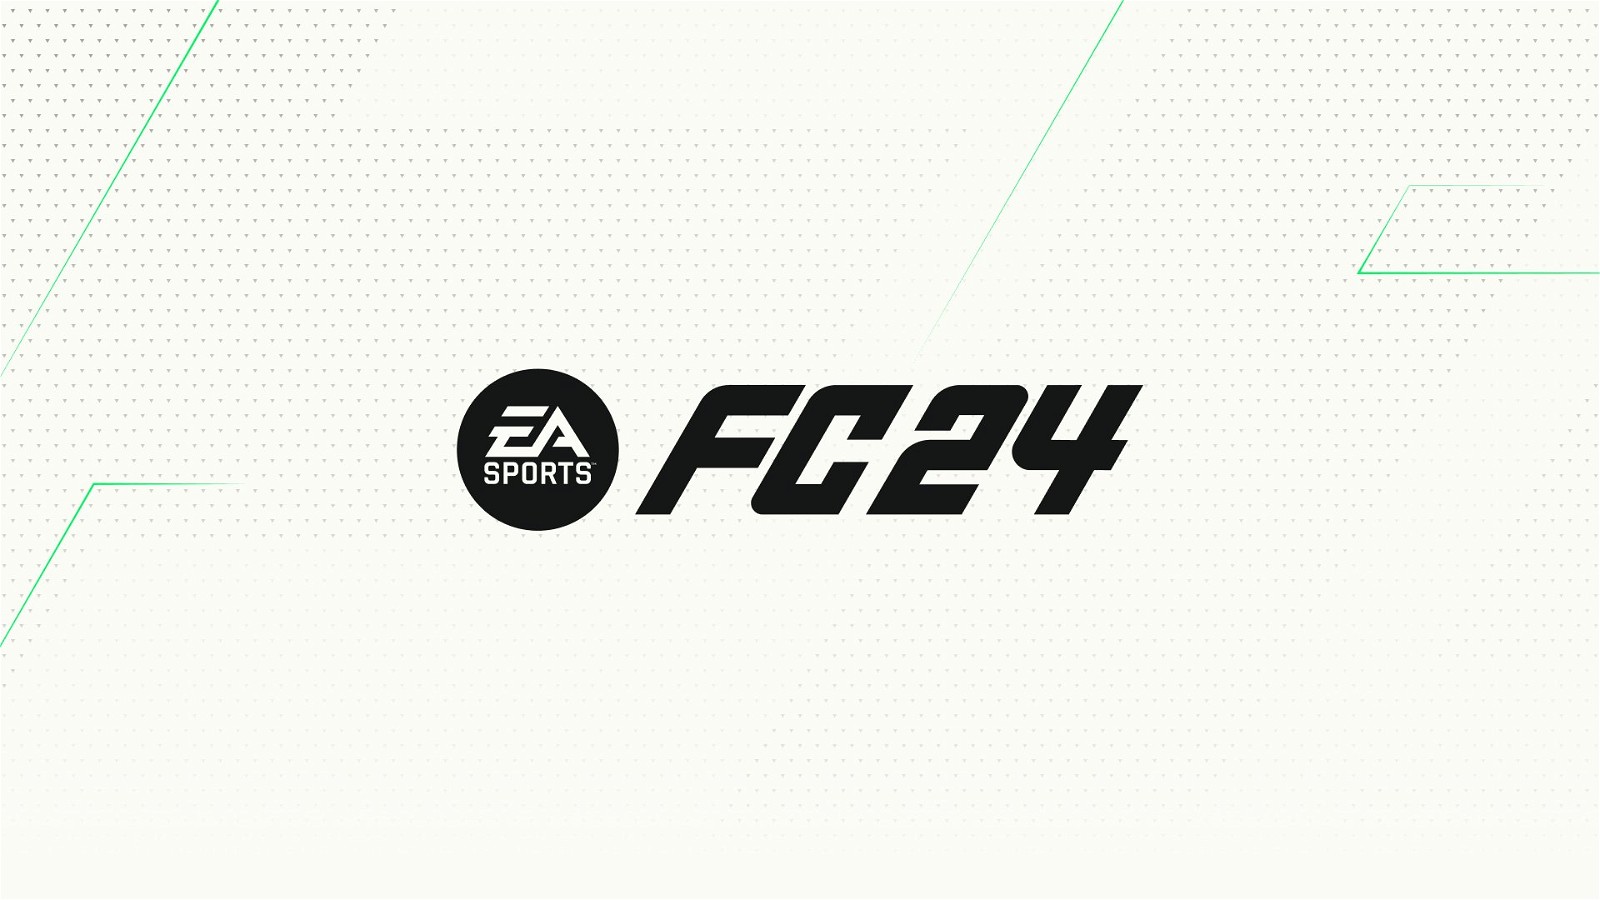 This logo was also included in the leaked cover, dates and pricing for EA Sports FC 24